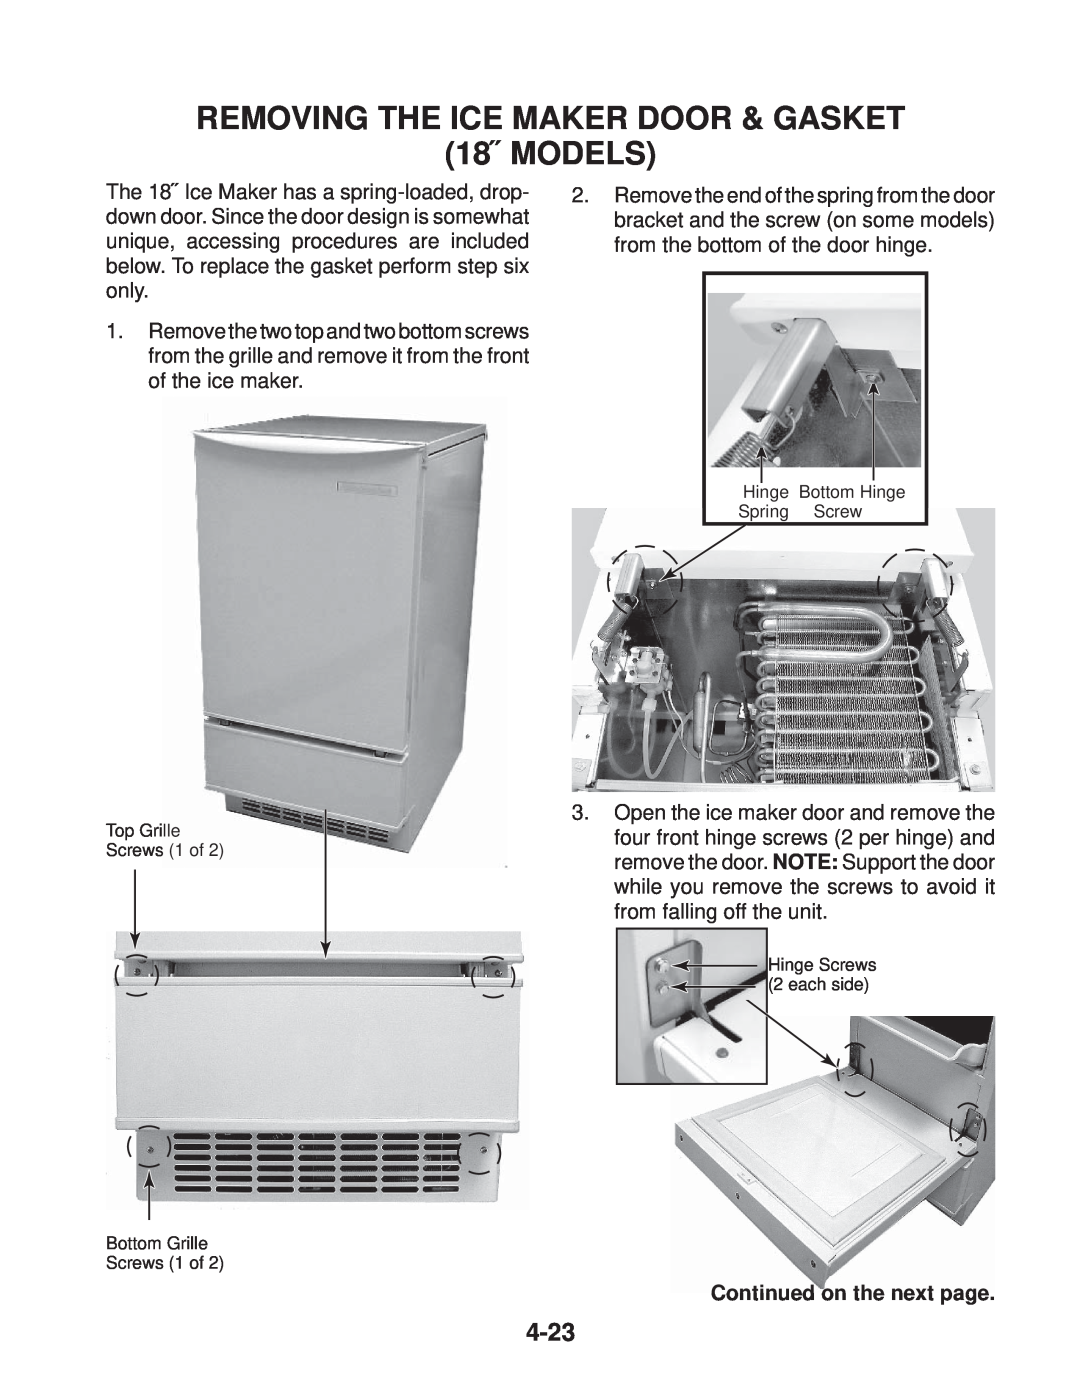 Whirlpool KUIA15NRH*11 REMOVING THE ICE MAKER DOOR & GASKET 18˝ MODELS, Continued on the next page, Top Grille Screws 1 of 